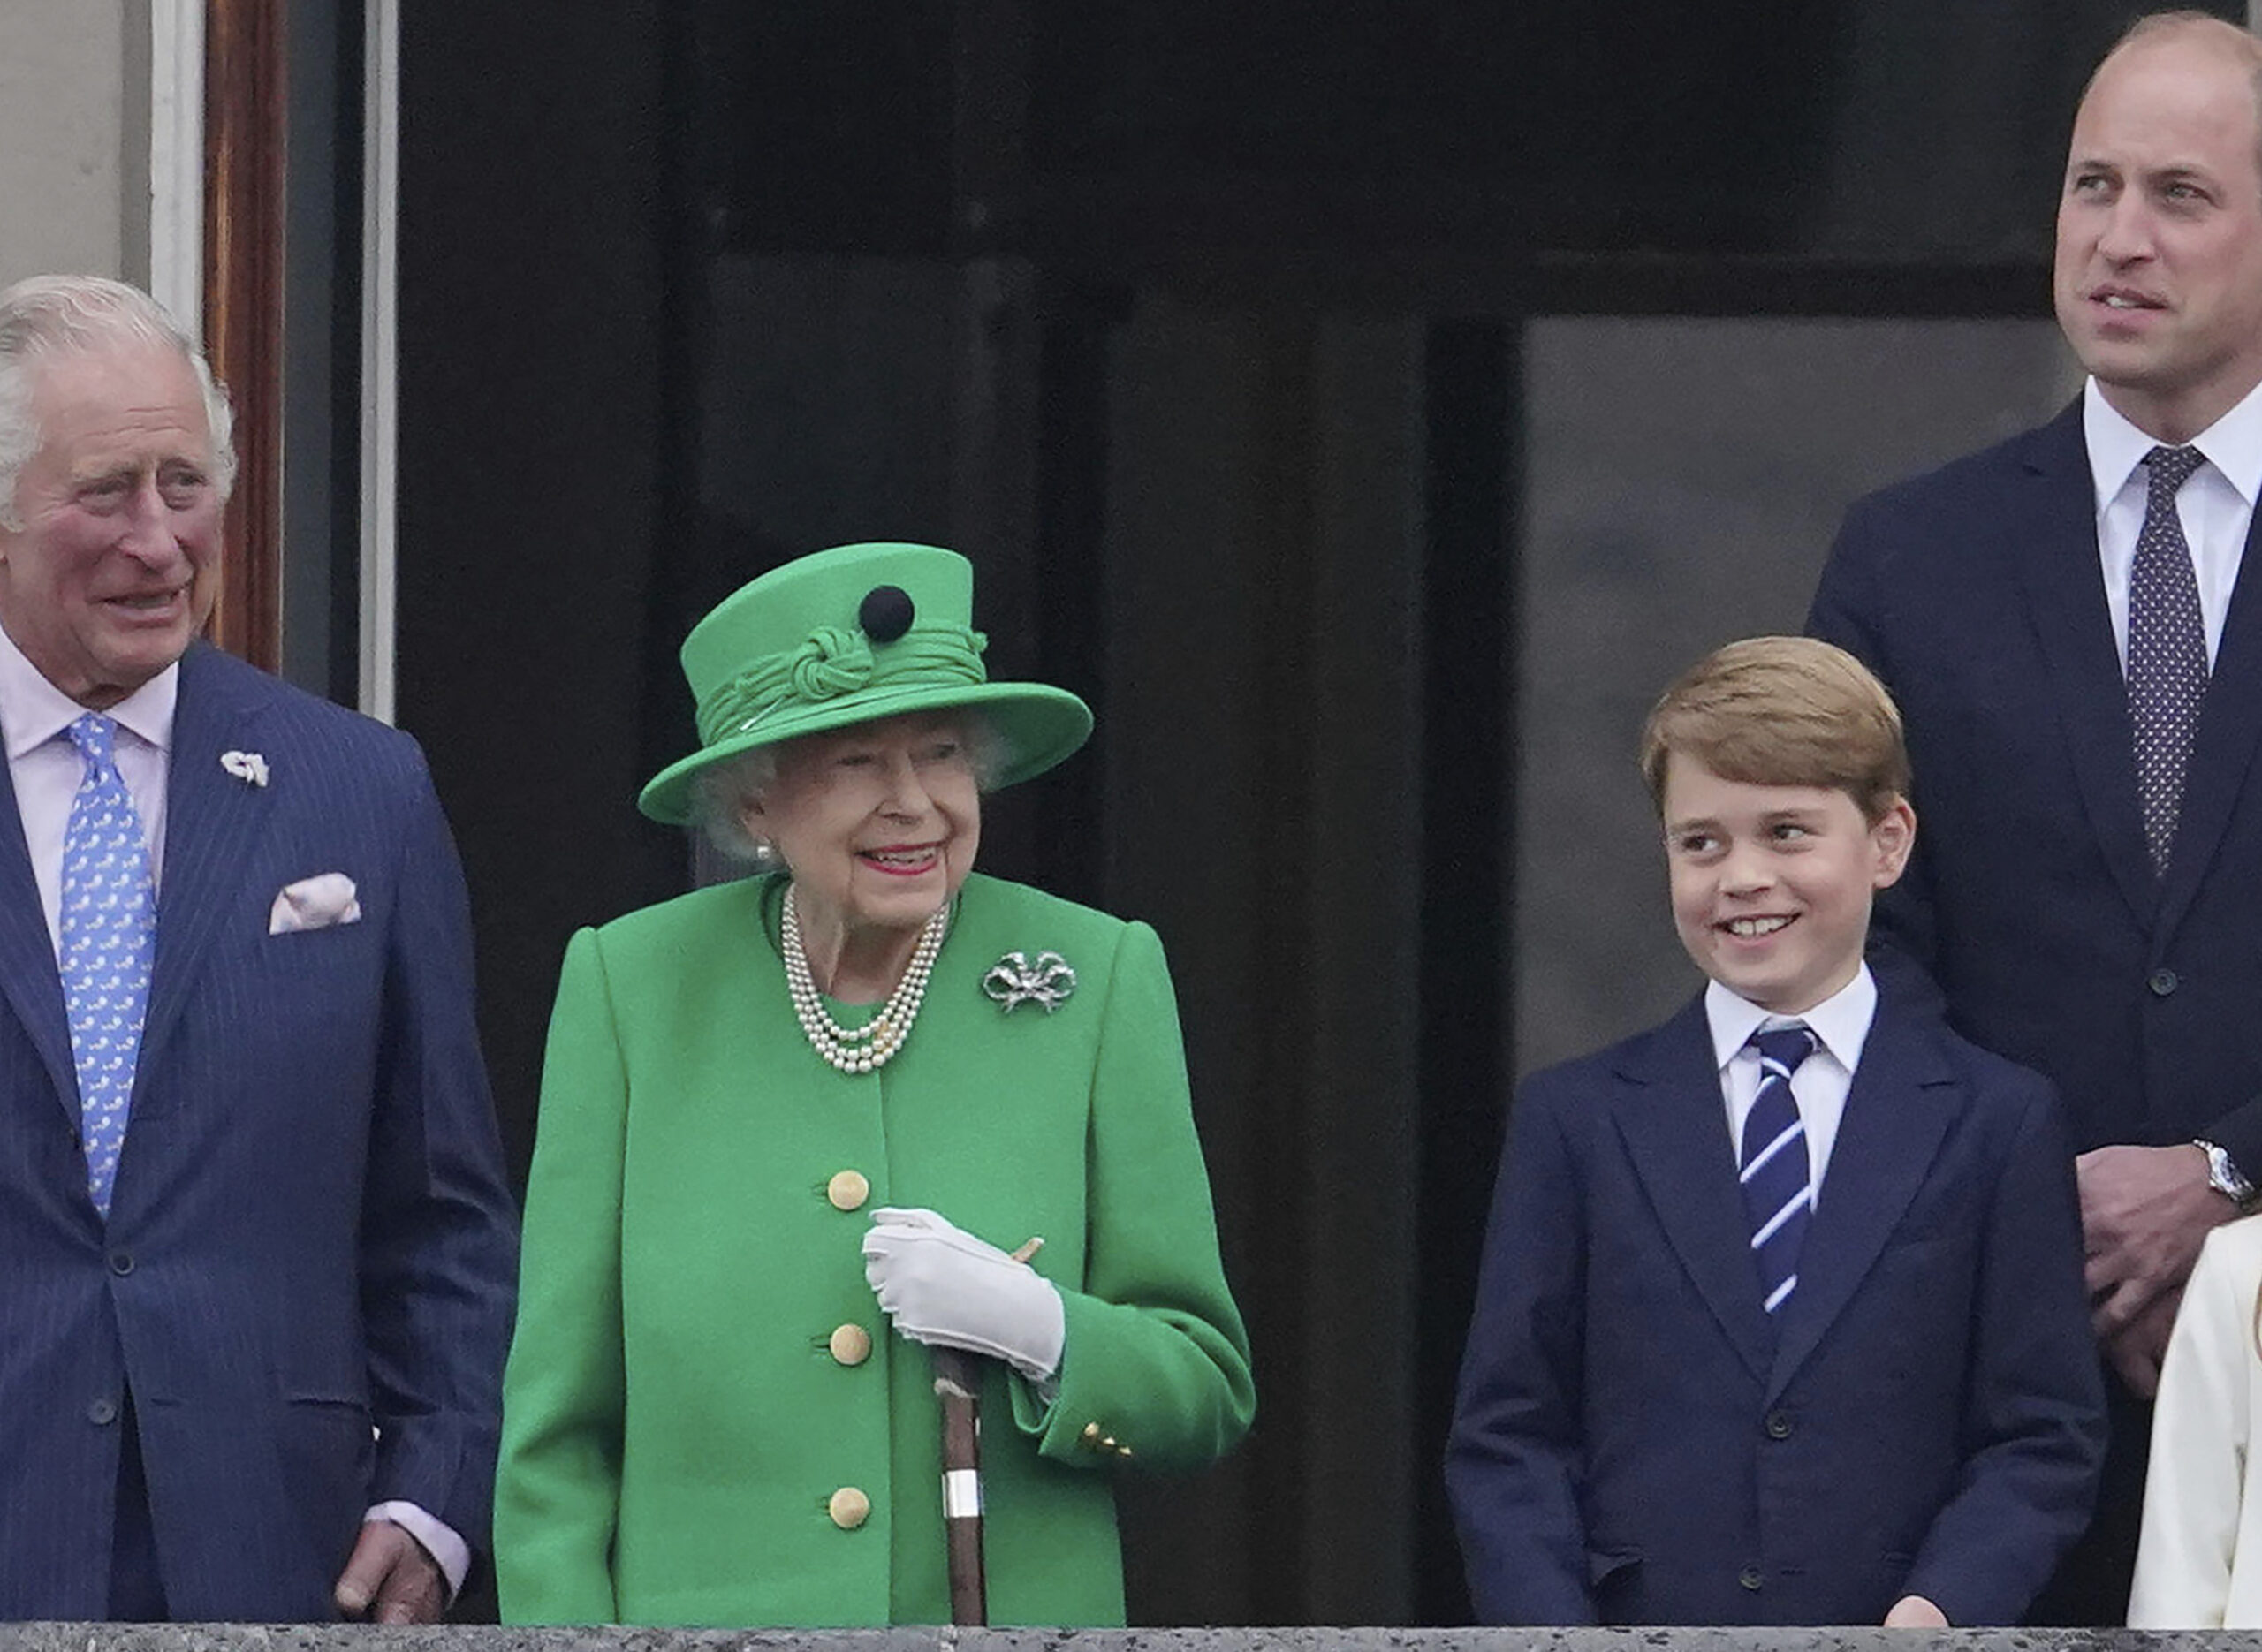 From left, Prince Charles, Queen Elizabeth II, Prince George and Prince William appear on the balcony of Buckingham Palace during the Platinum Jubilee Pageant outside Buckingham Palace in London, June 5, 2022. (Jonathan Brady/Pool Photo via AP)